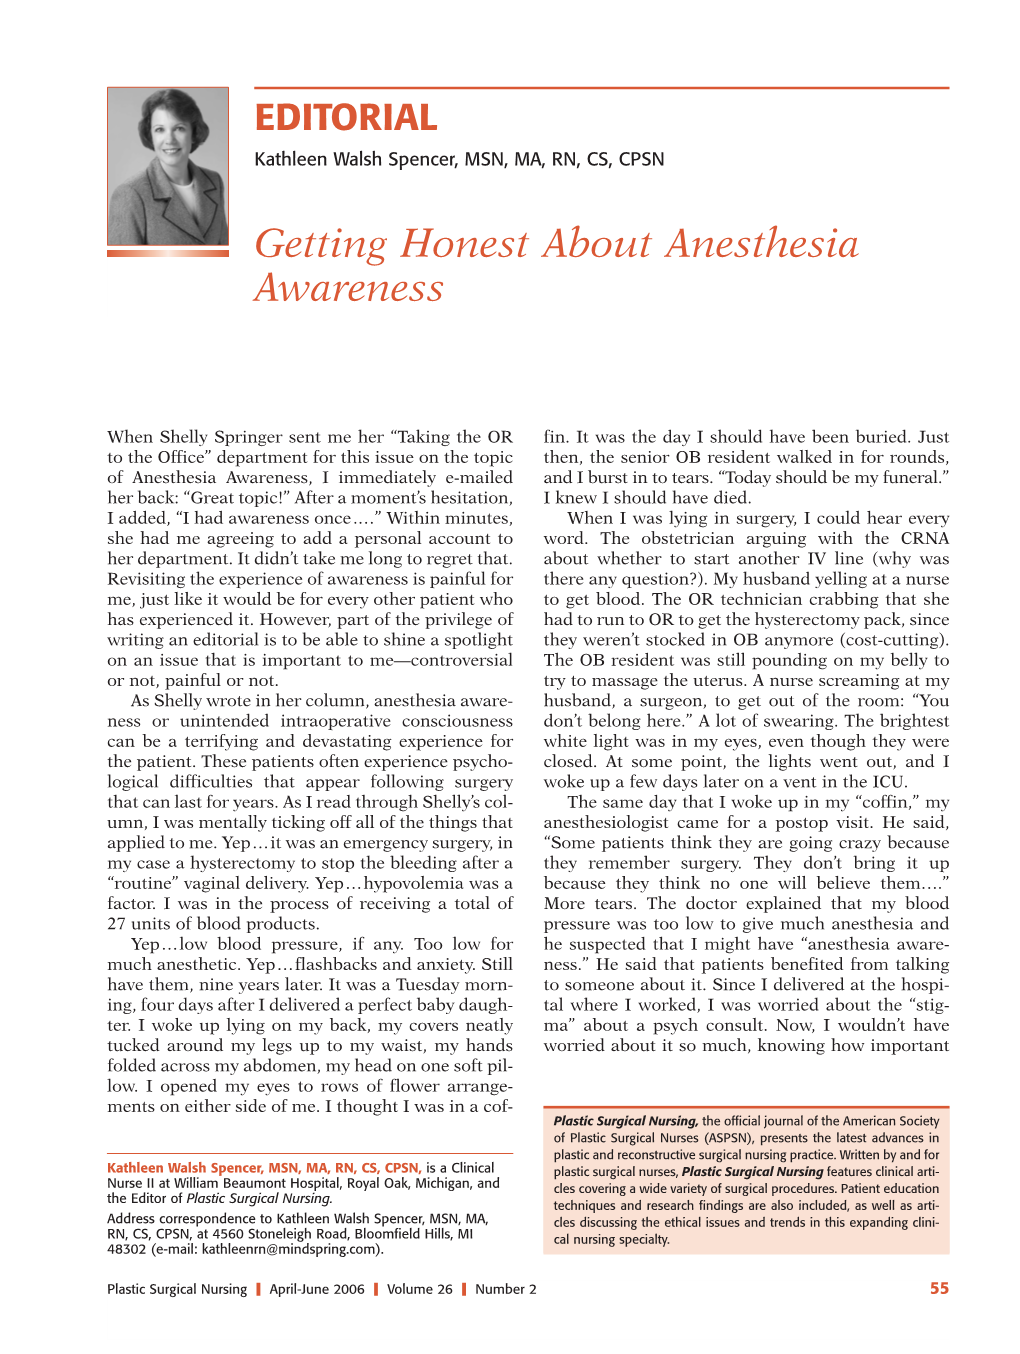 Getting Honest About Anesthesia Awareness